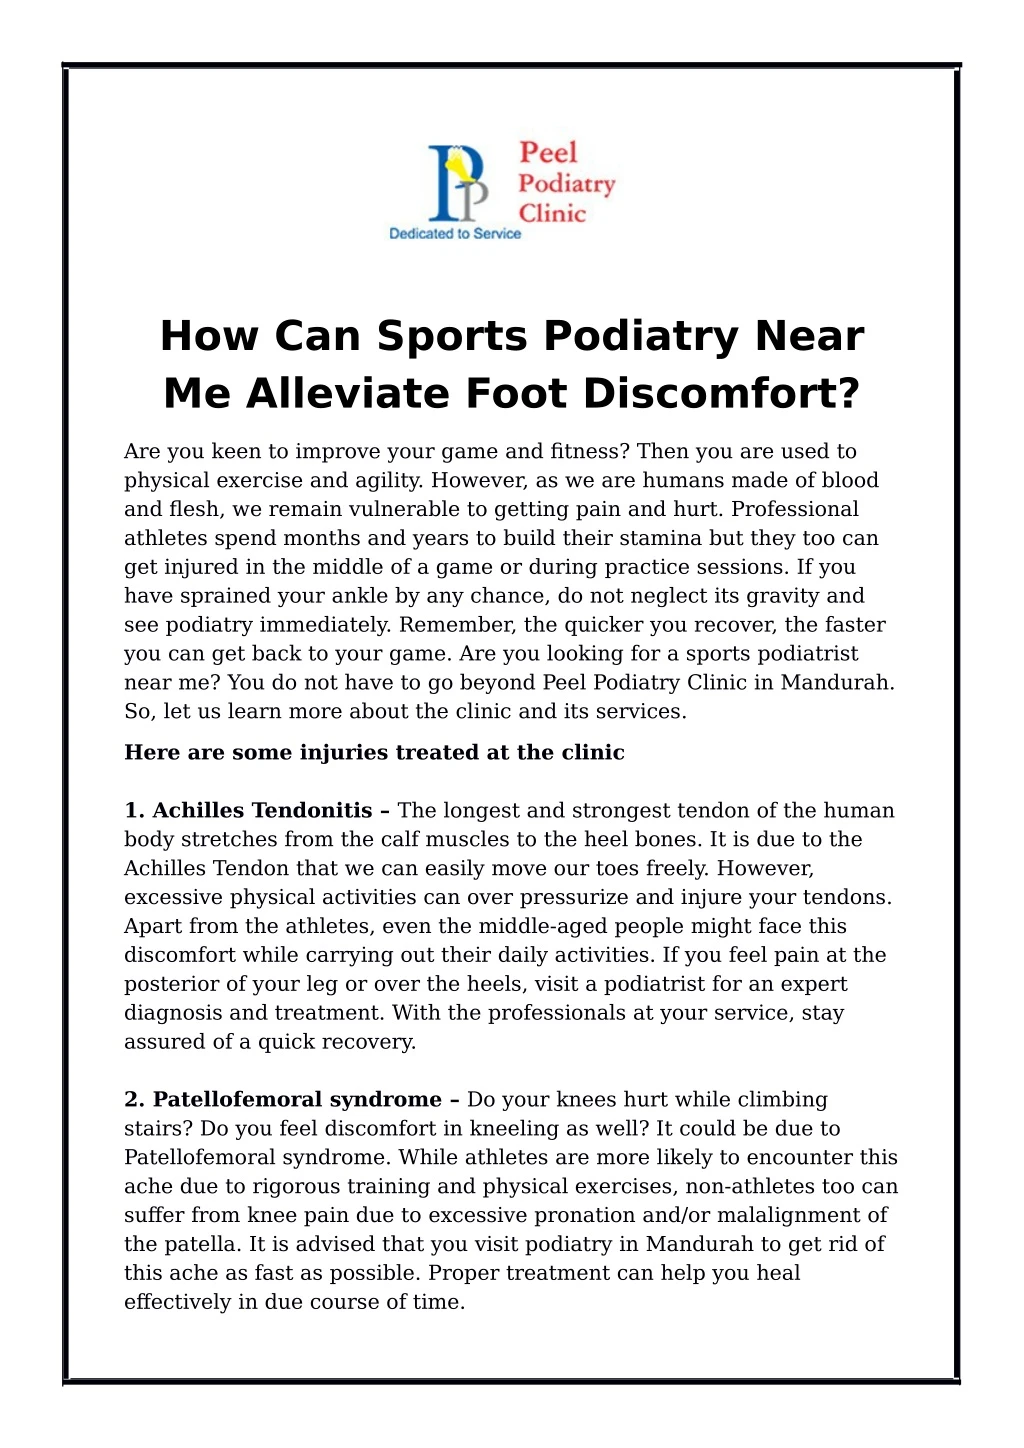 how can sports podiatry near me alleviate foot